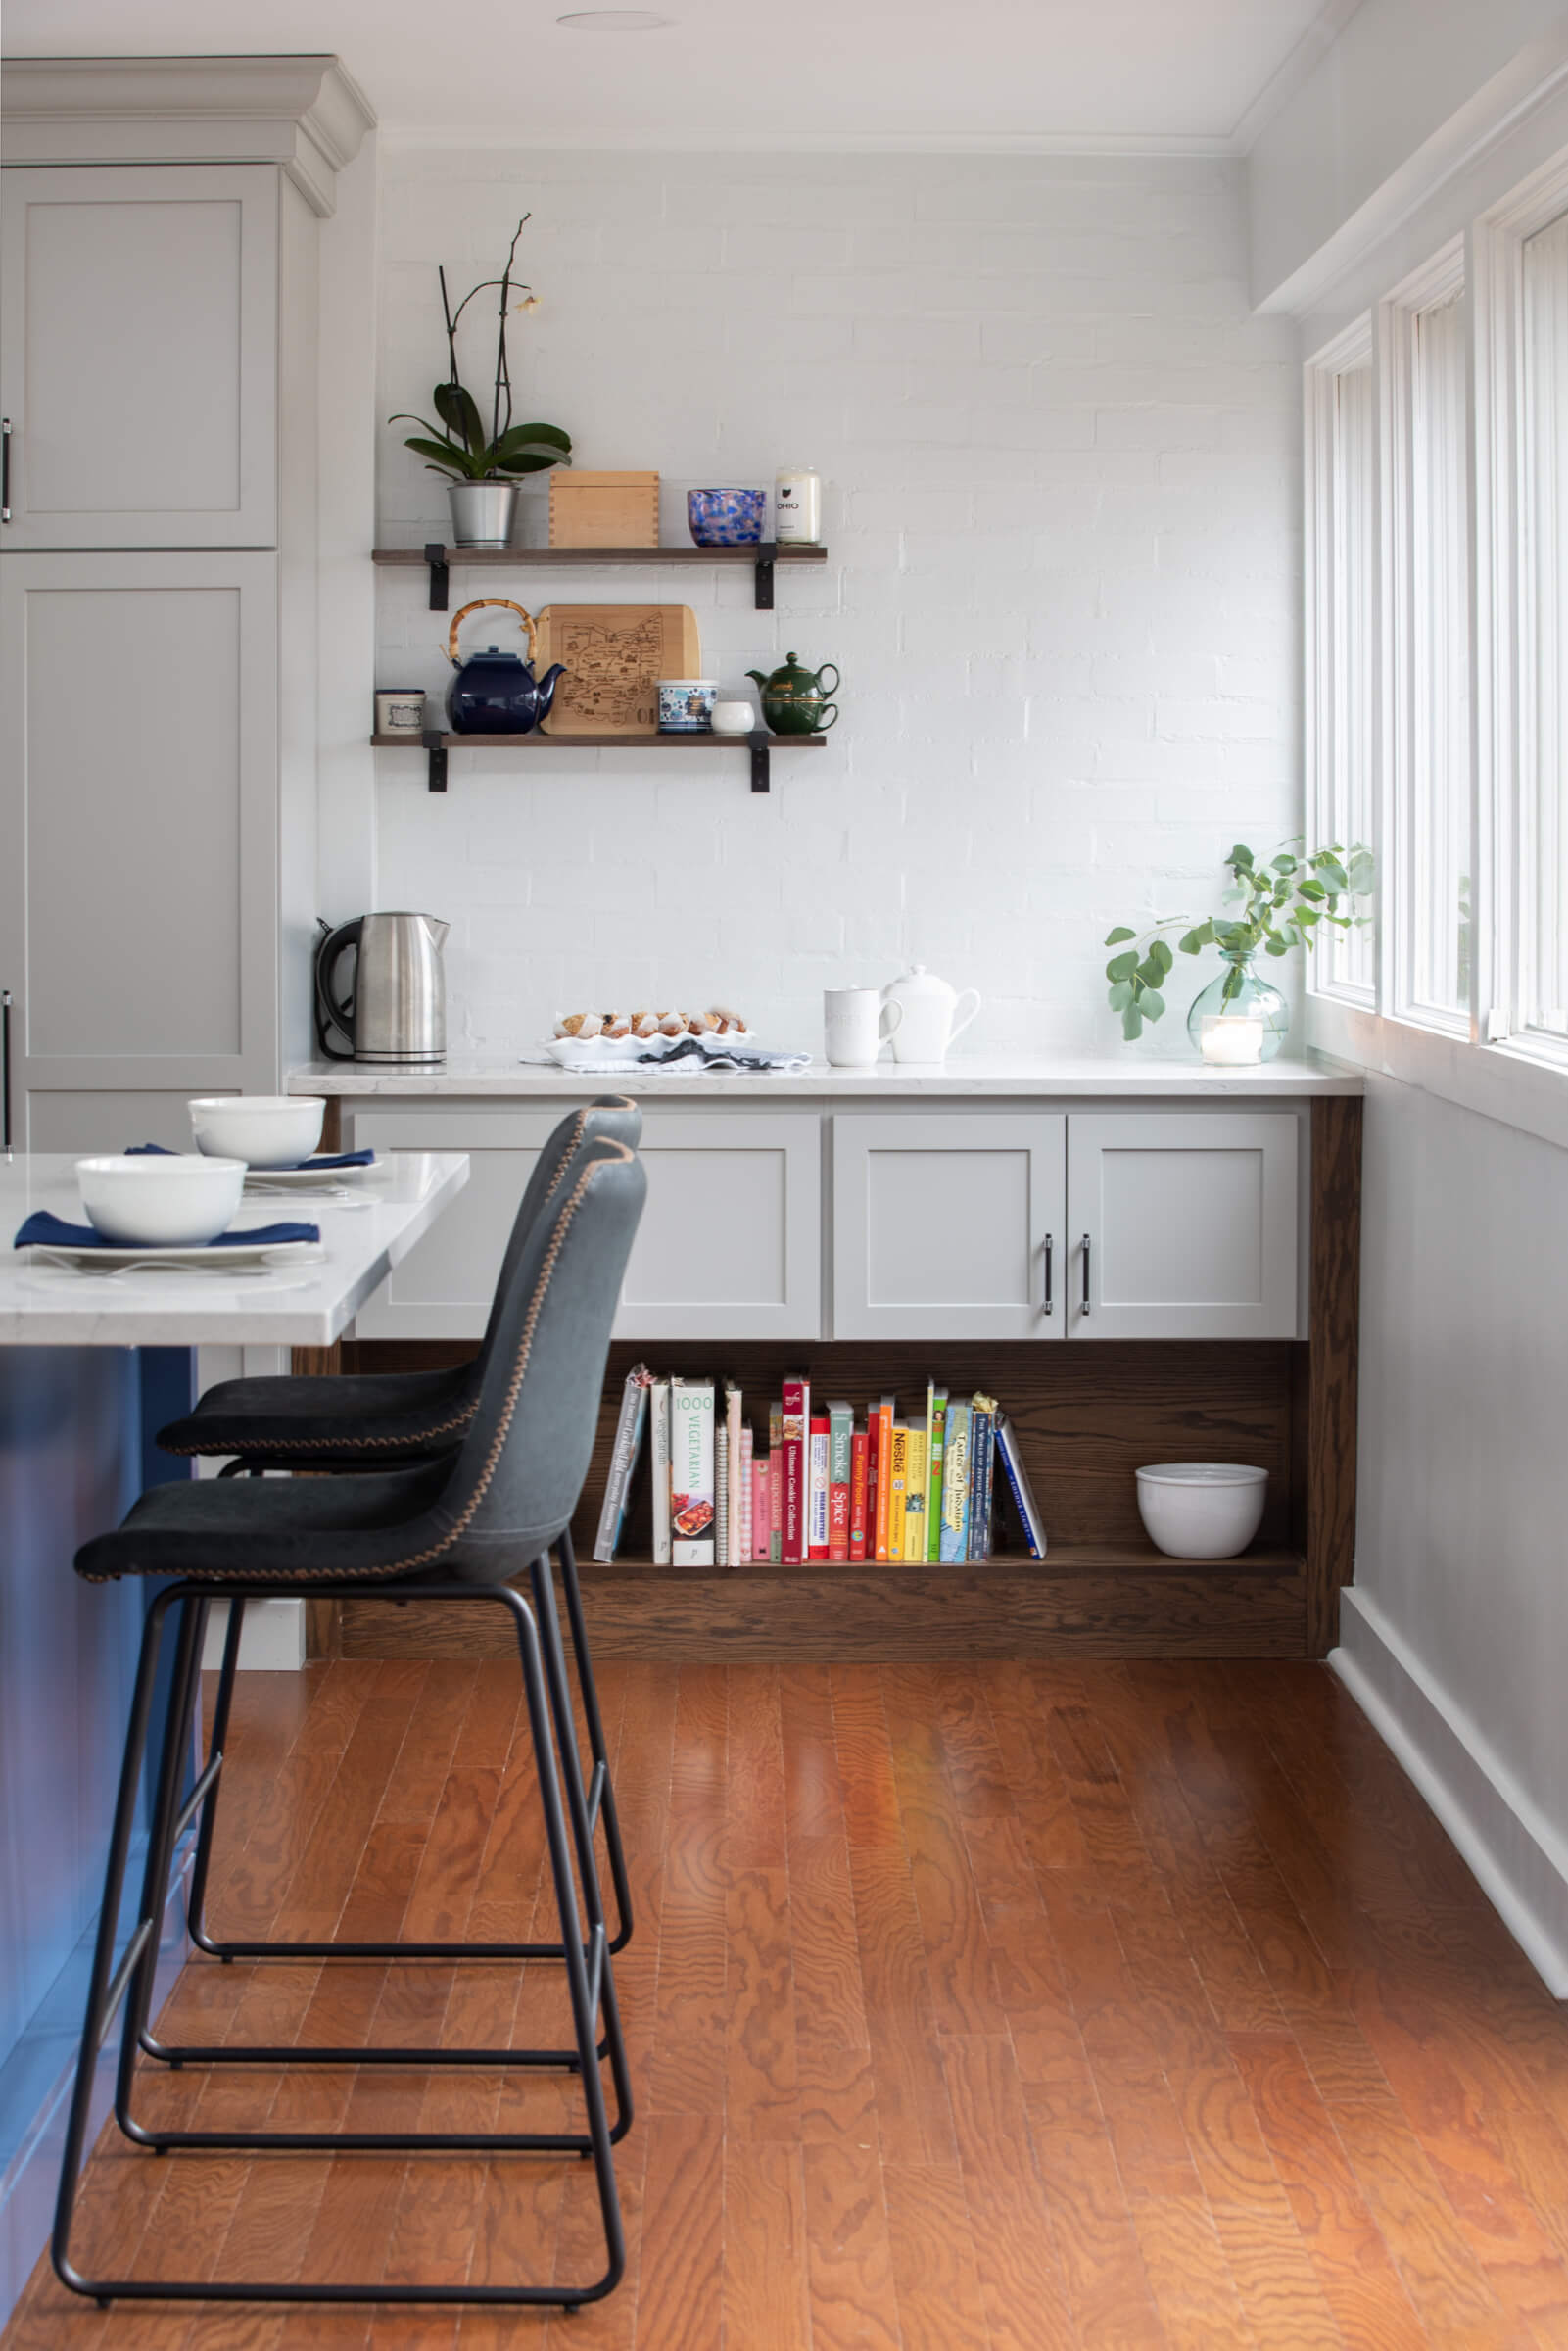 A kitchen corner that features a two-toned cabinet and open shelf space for cook books and decorative display.